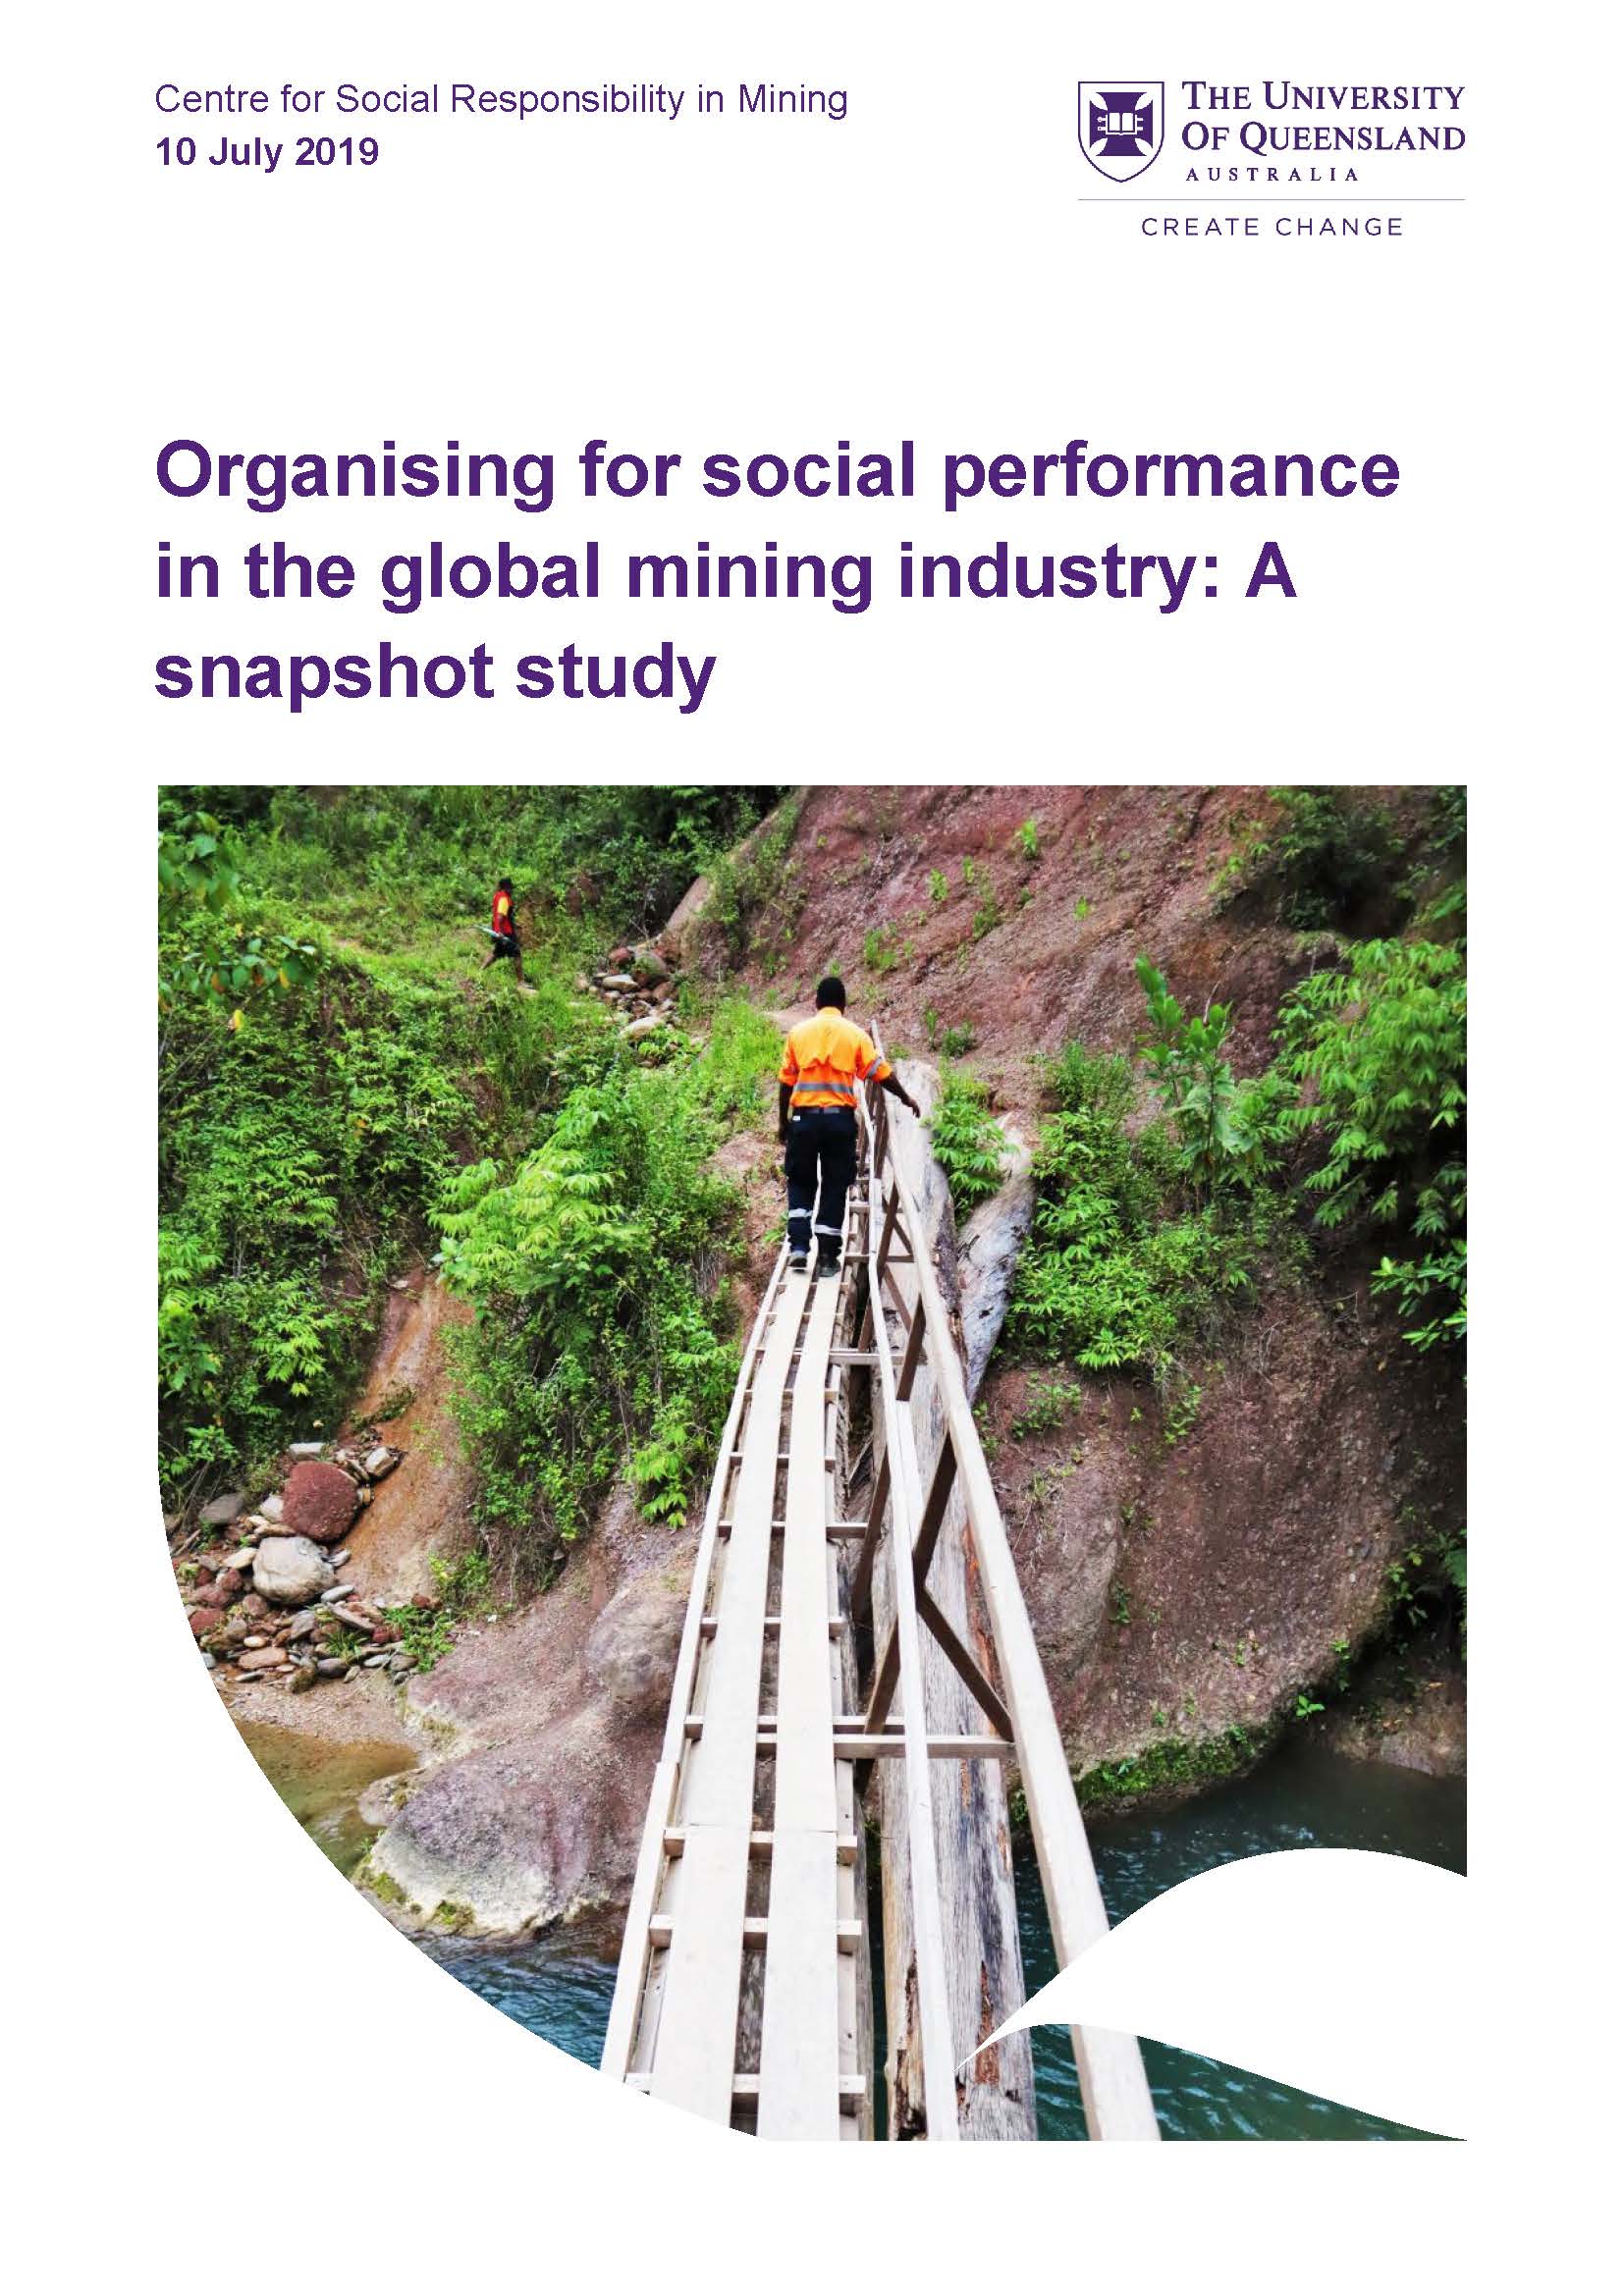 Organising for social performance in the global mining industry: A snapshot study